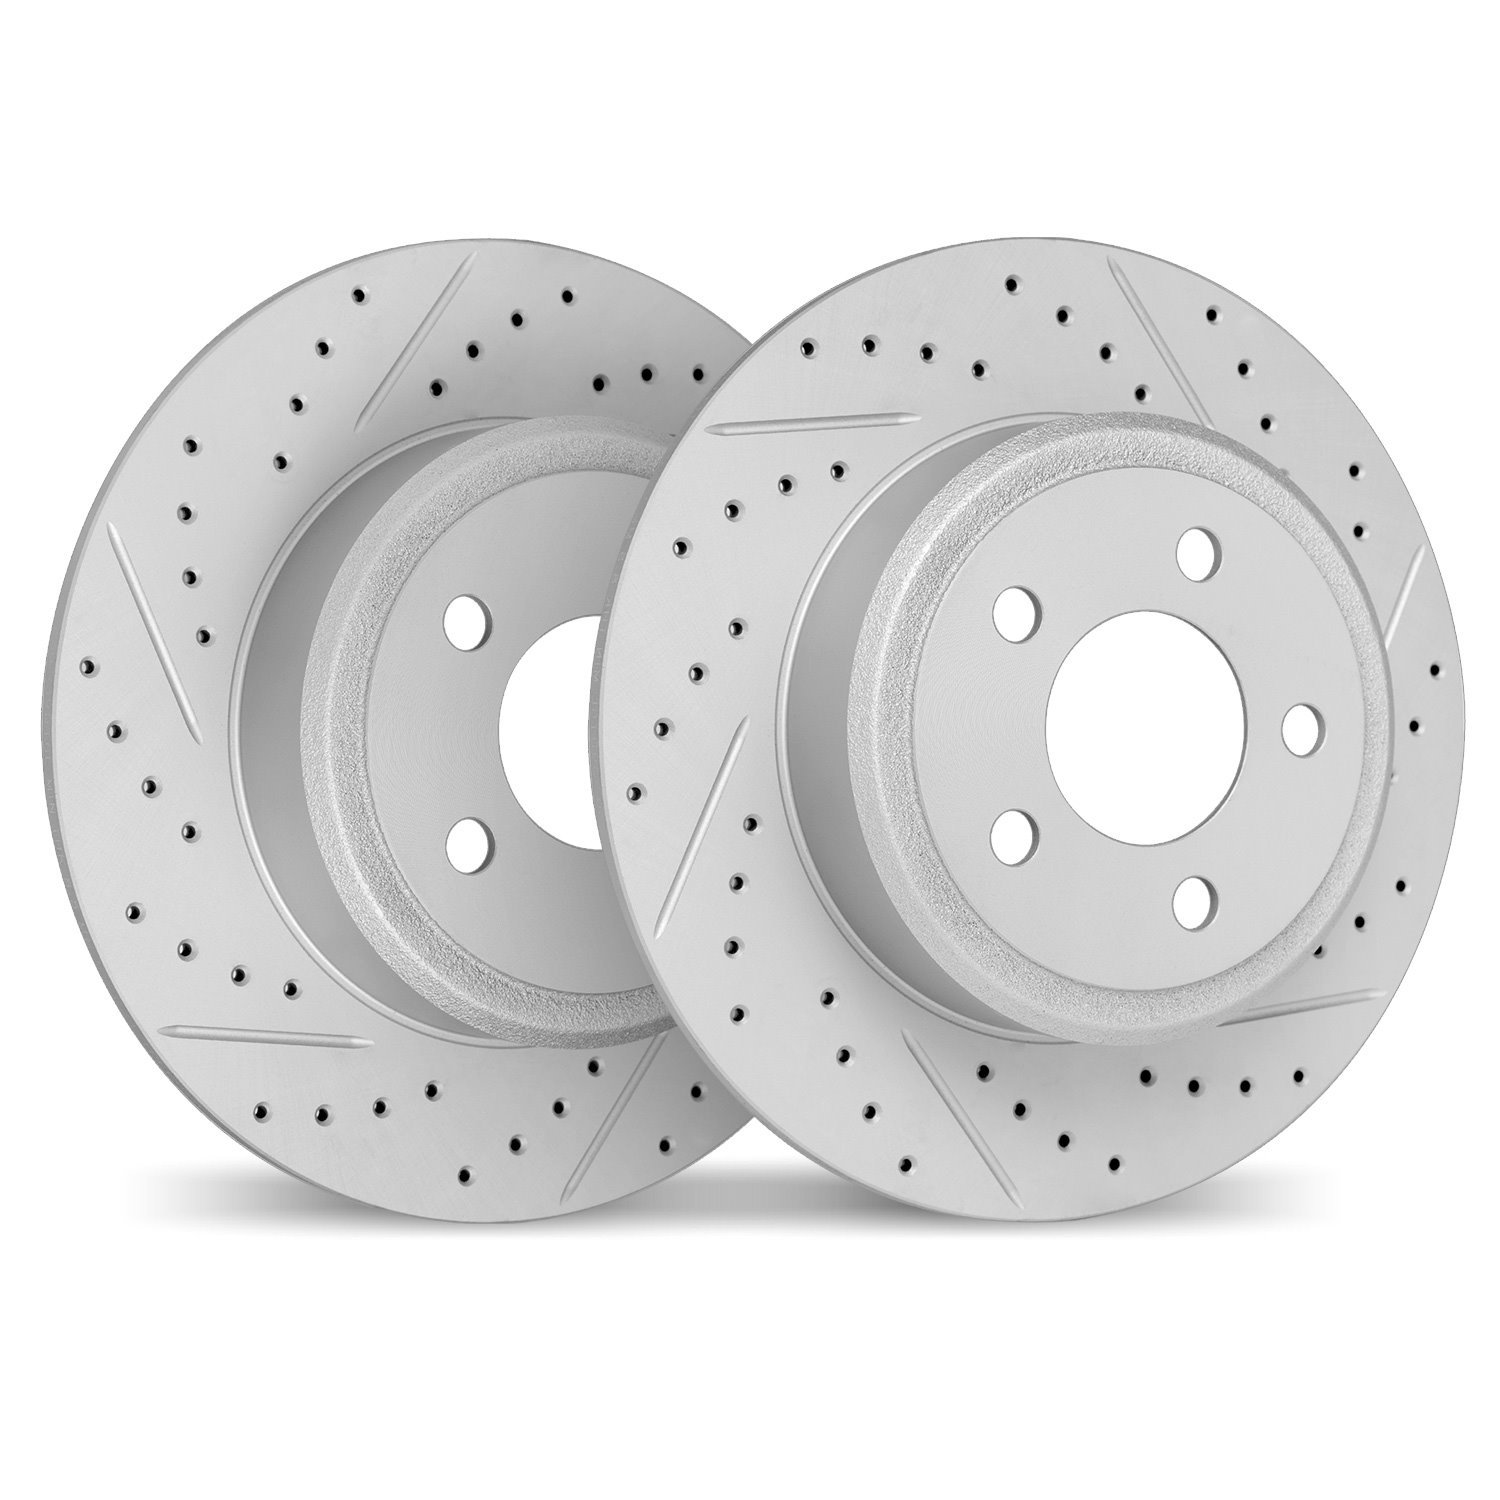 2002-76060 Geoperformance Drilled/Slotted Brake Rotors, Fits Select Lexus/Toyota/Scion, Position: Rear